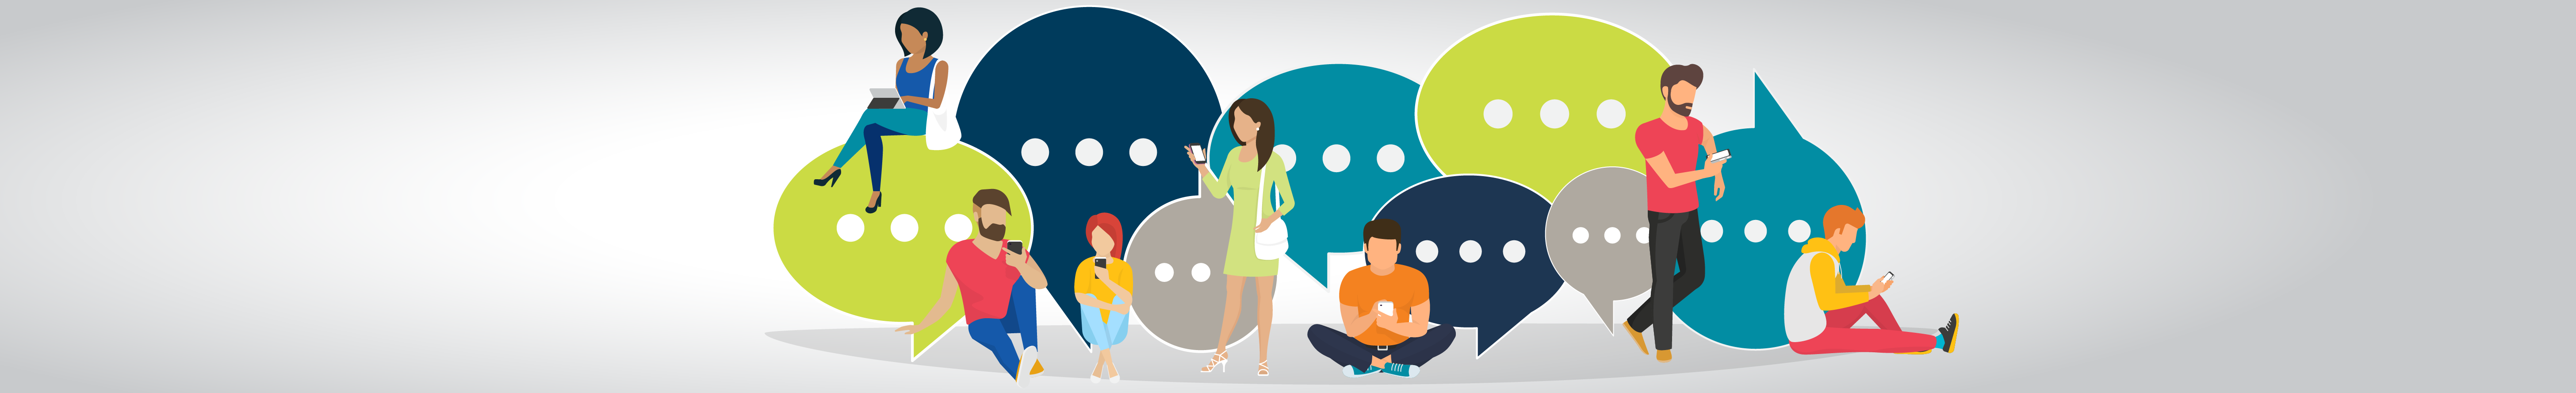 Speech bubbles for comment and reply concept. Illustration of men and women sitting on bubbles using mobile smartphone and tablets for texting and communicating on networks.